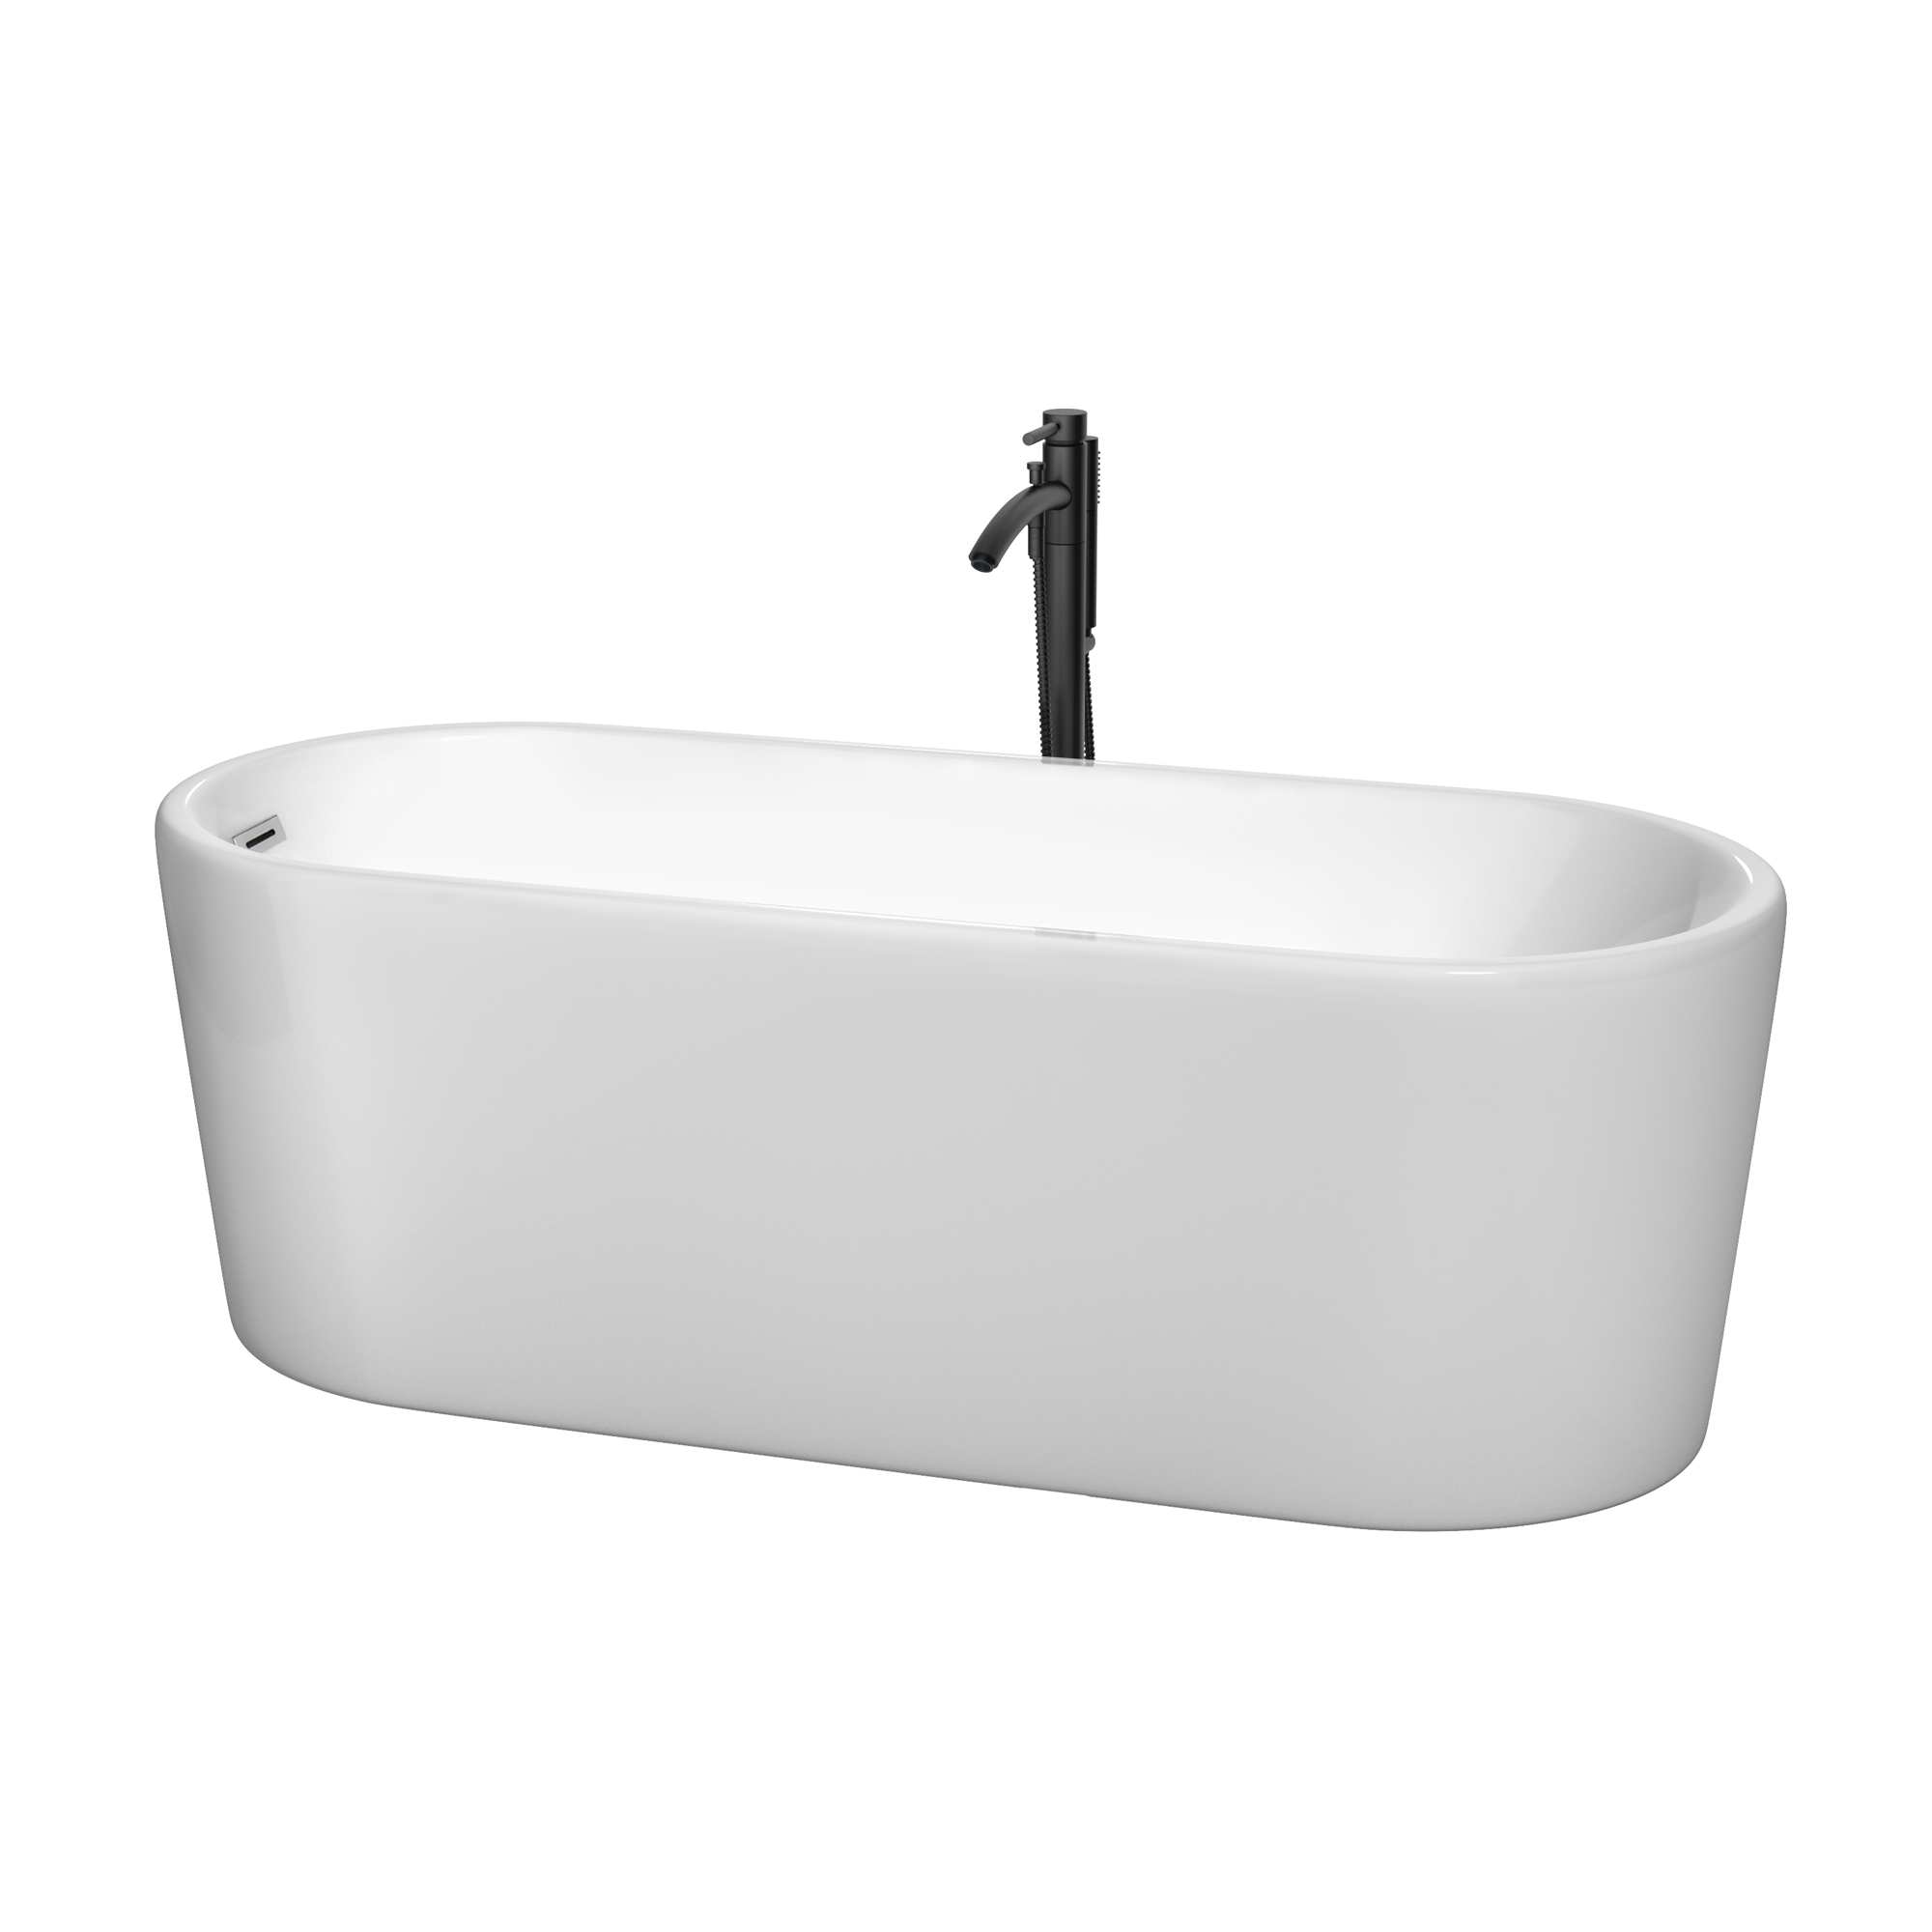 67" Freestanding Bathtub in White with Polished Chrome Trim and Floor Mounted Faucet in Matte Black Finish